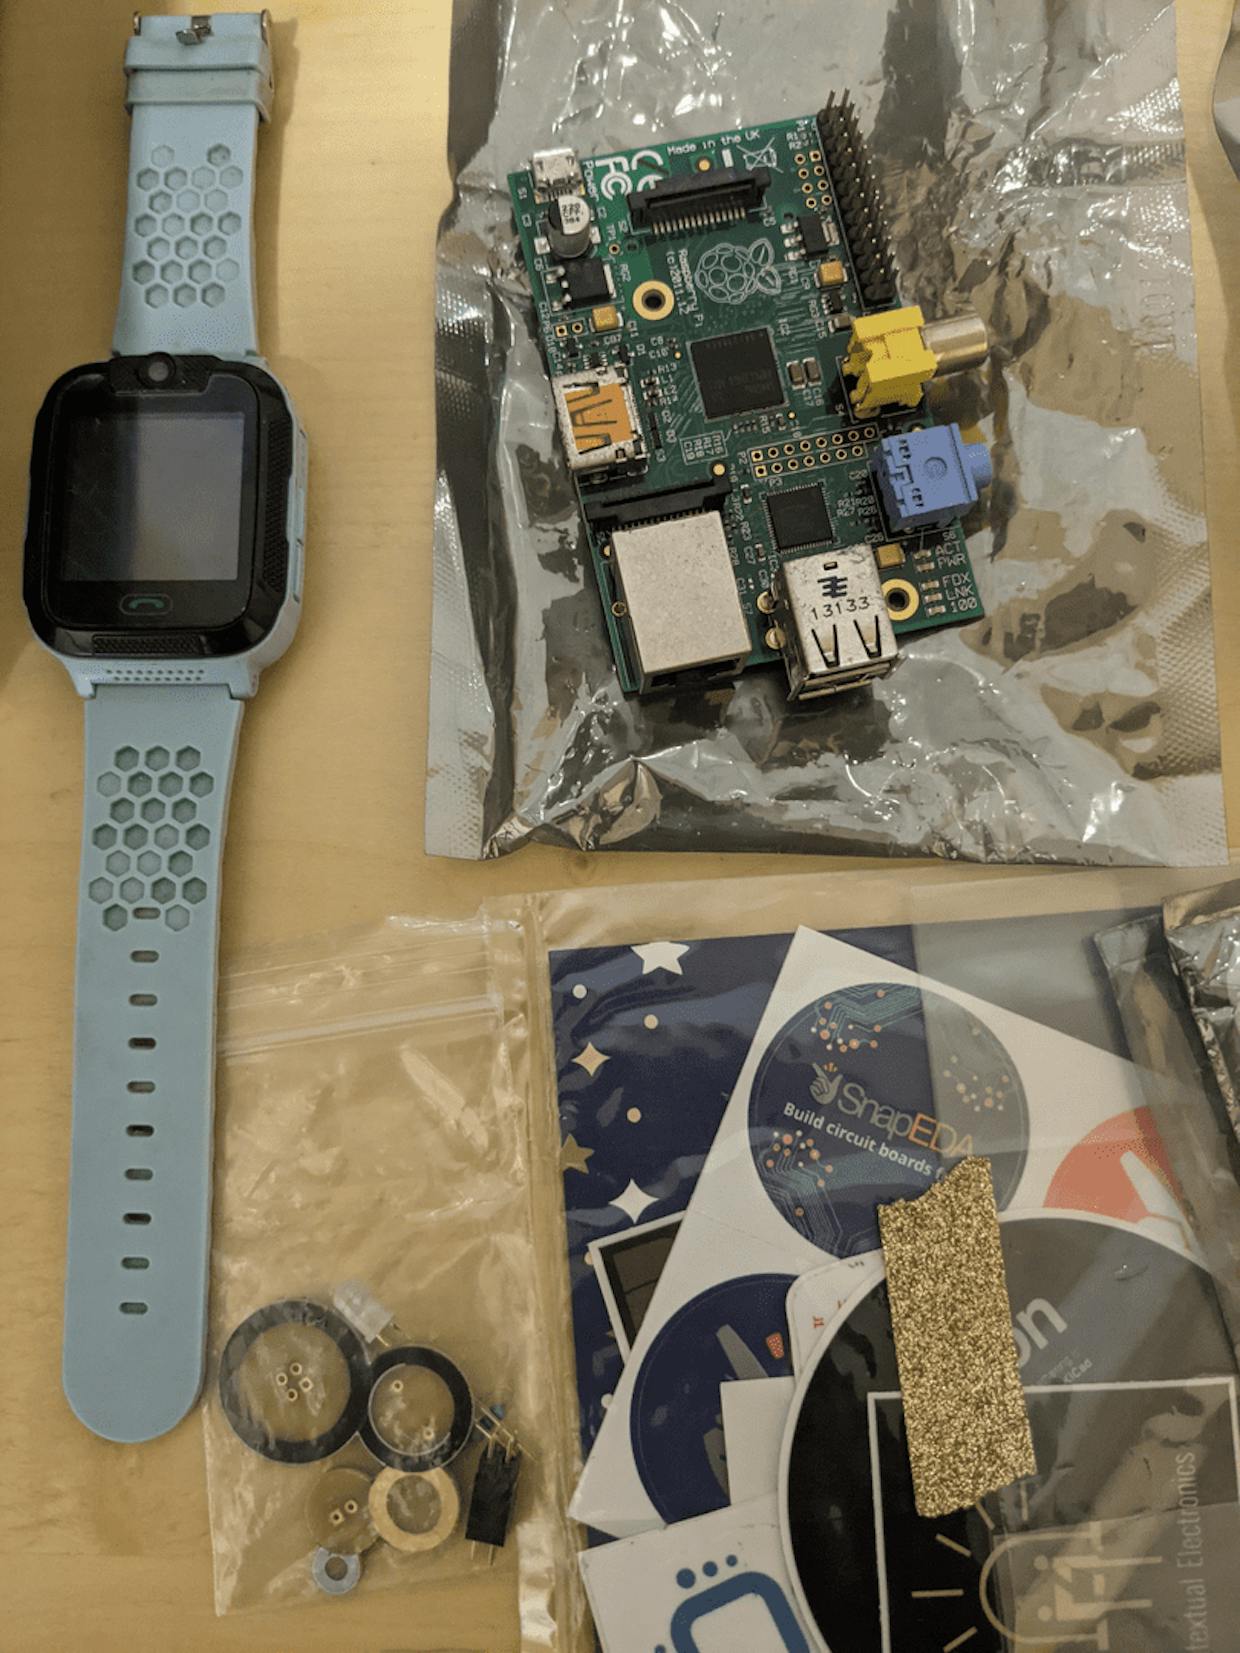 Stickers, Wearable buttons and what appears to be a Moochies watch